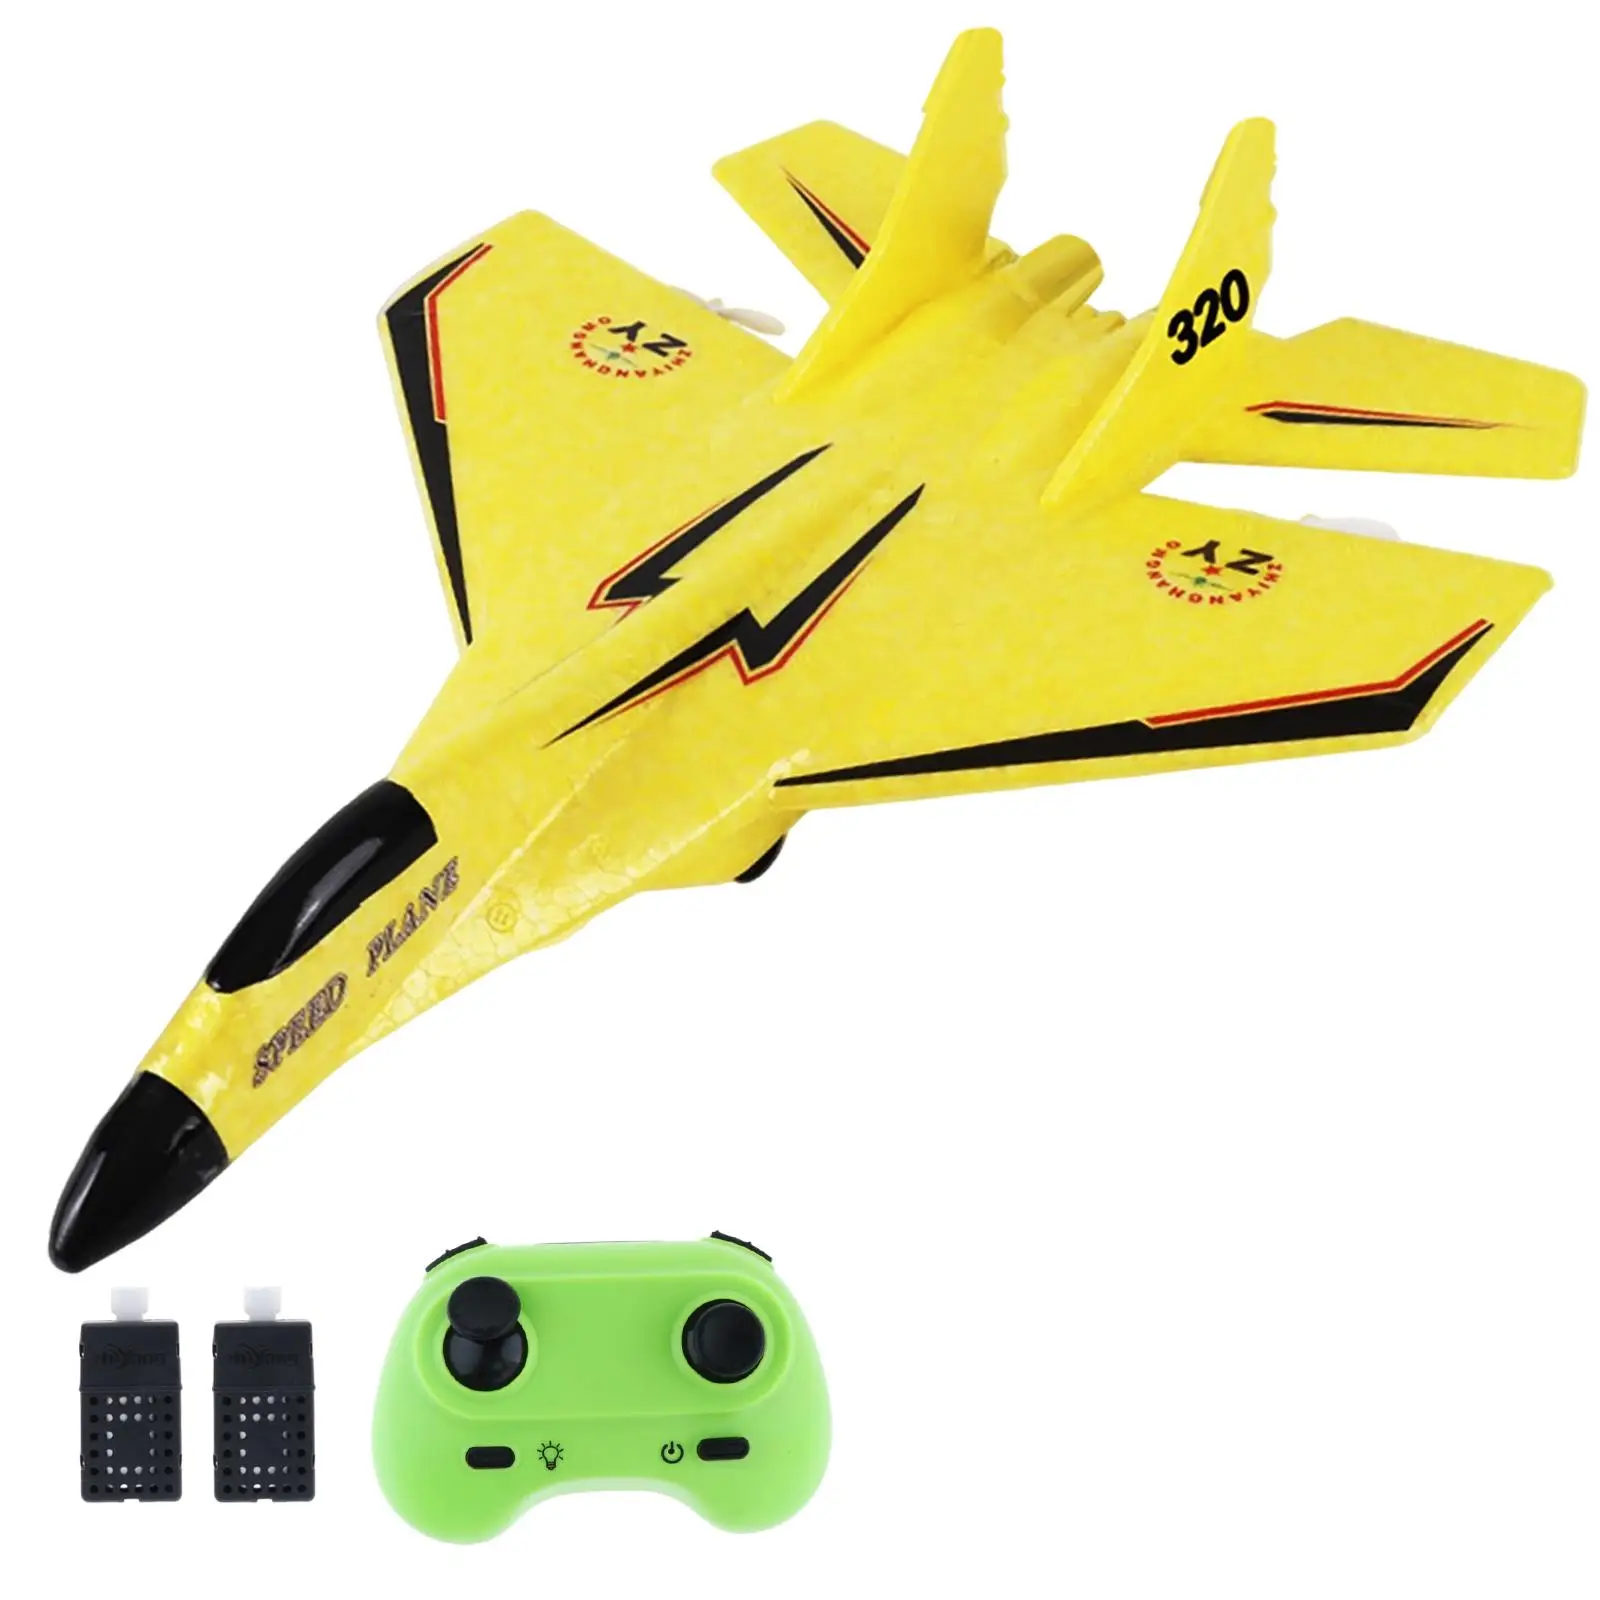 2 CH RC Plane Portable Easy to Control 2.4G Foam RC Airplane Hobby RC Glider RC Aircraft Jet for Beginner Kids Adults Boys Girls